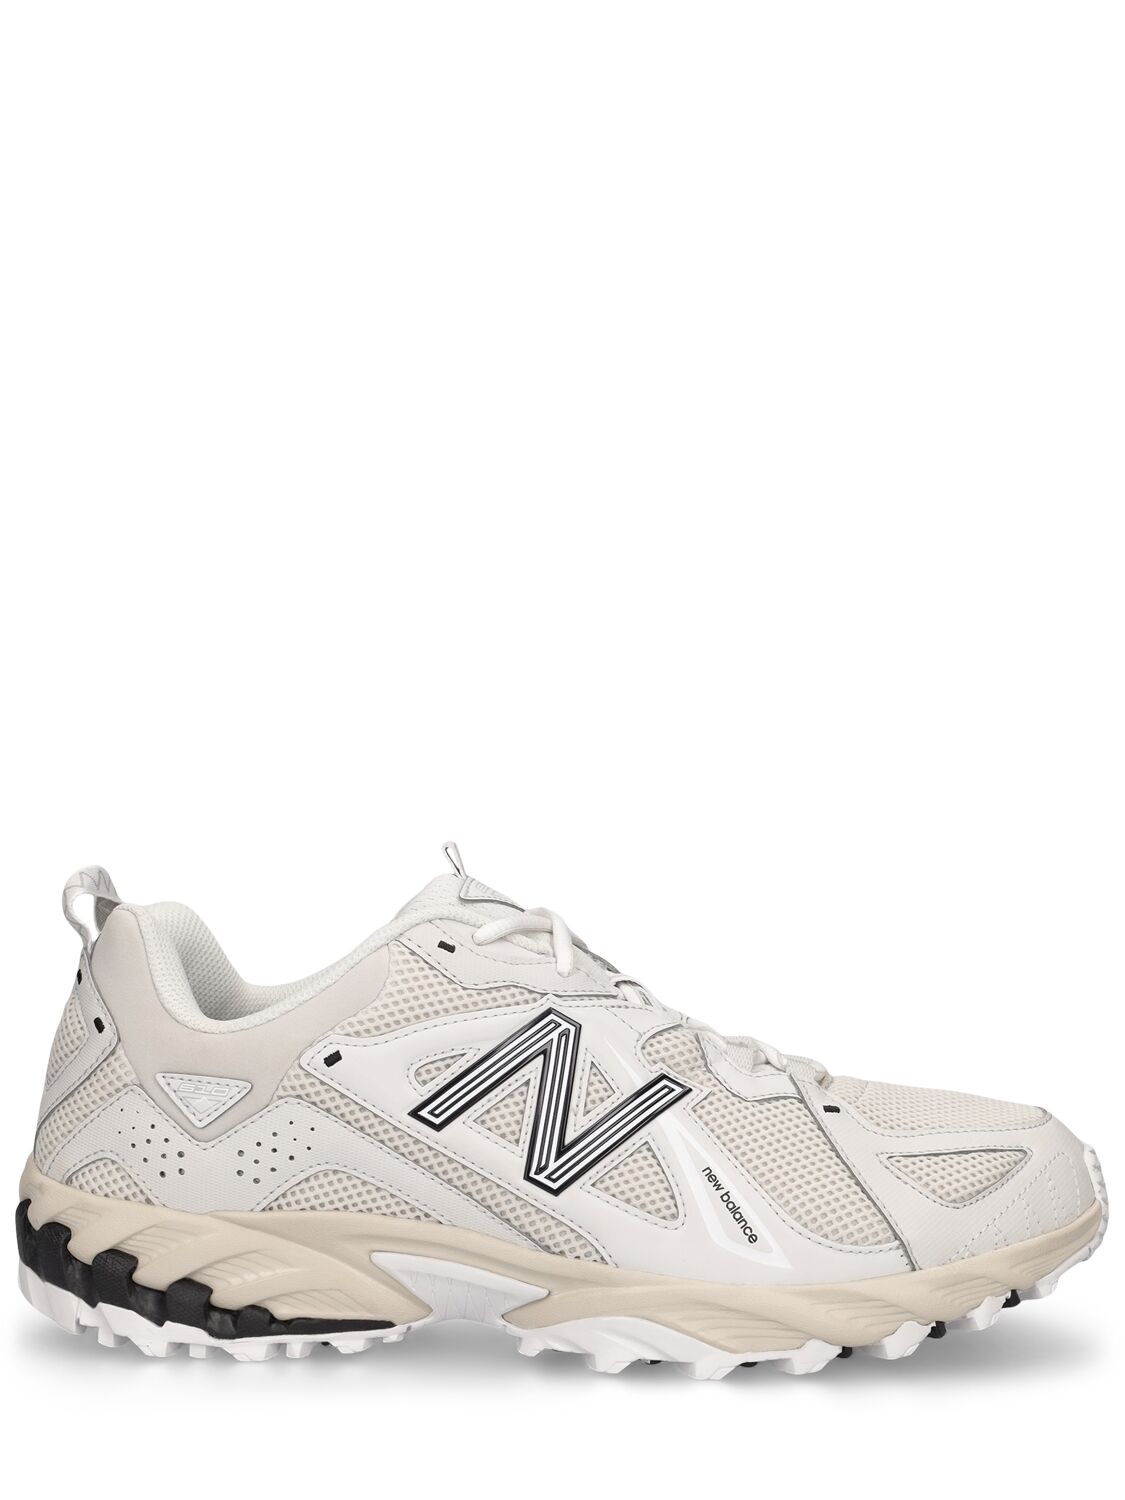 NEW BALANCE 610 SNEAKERS